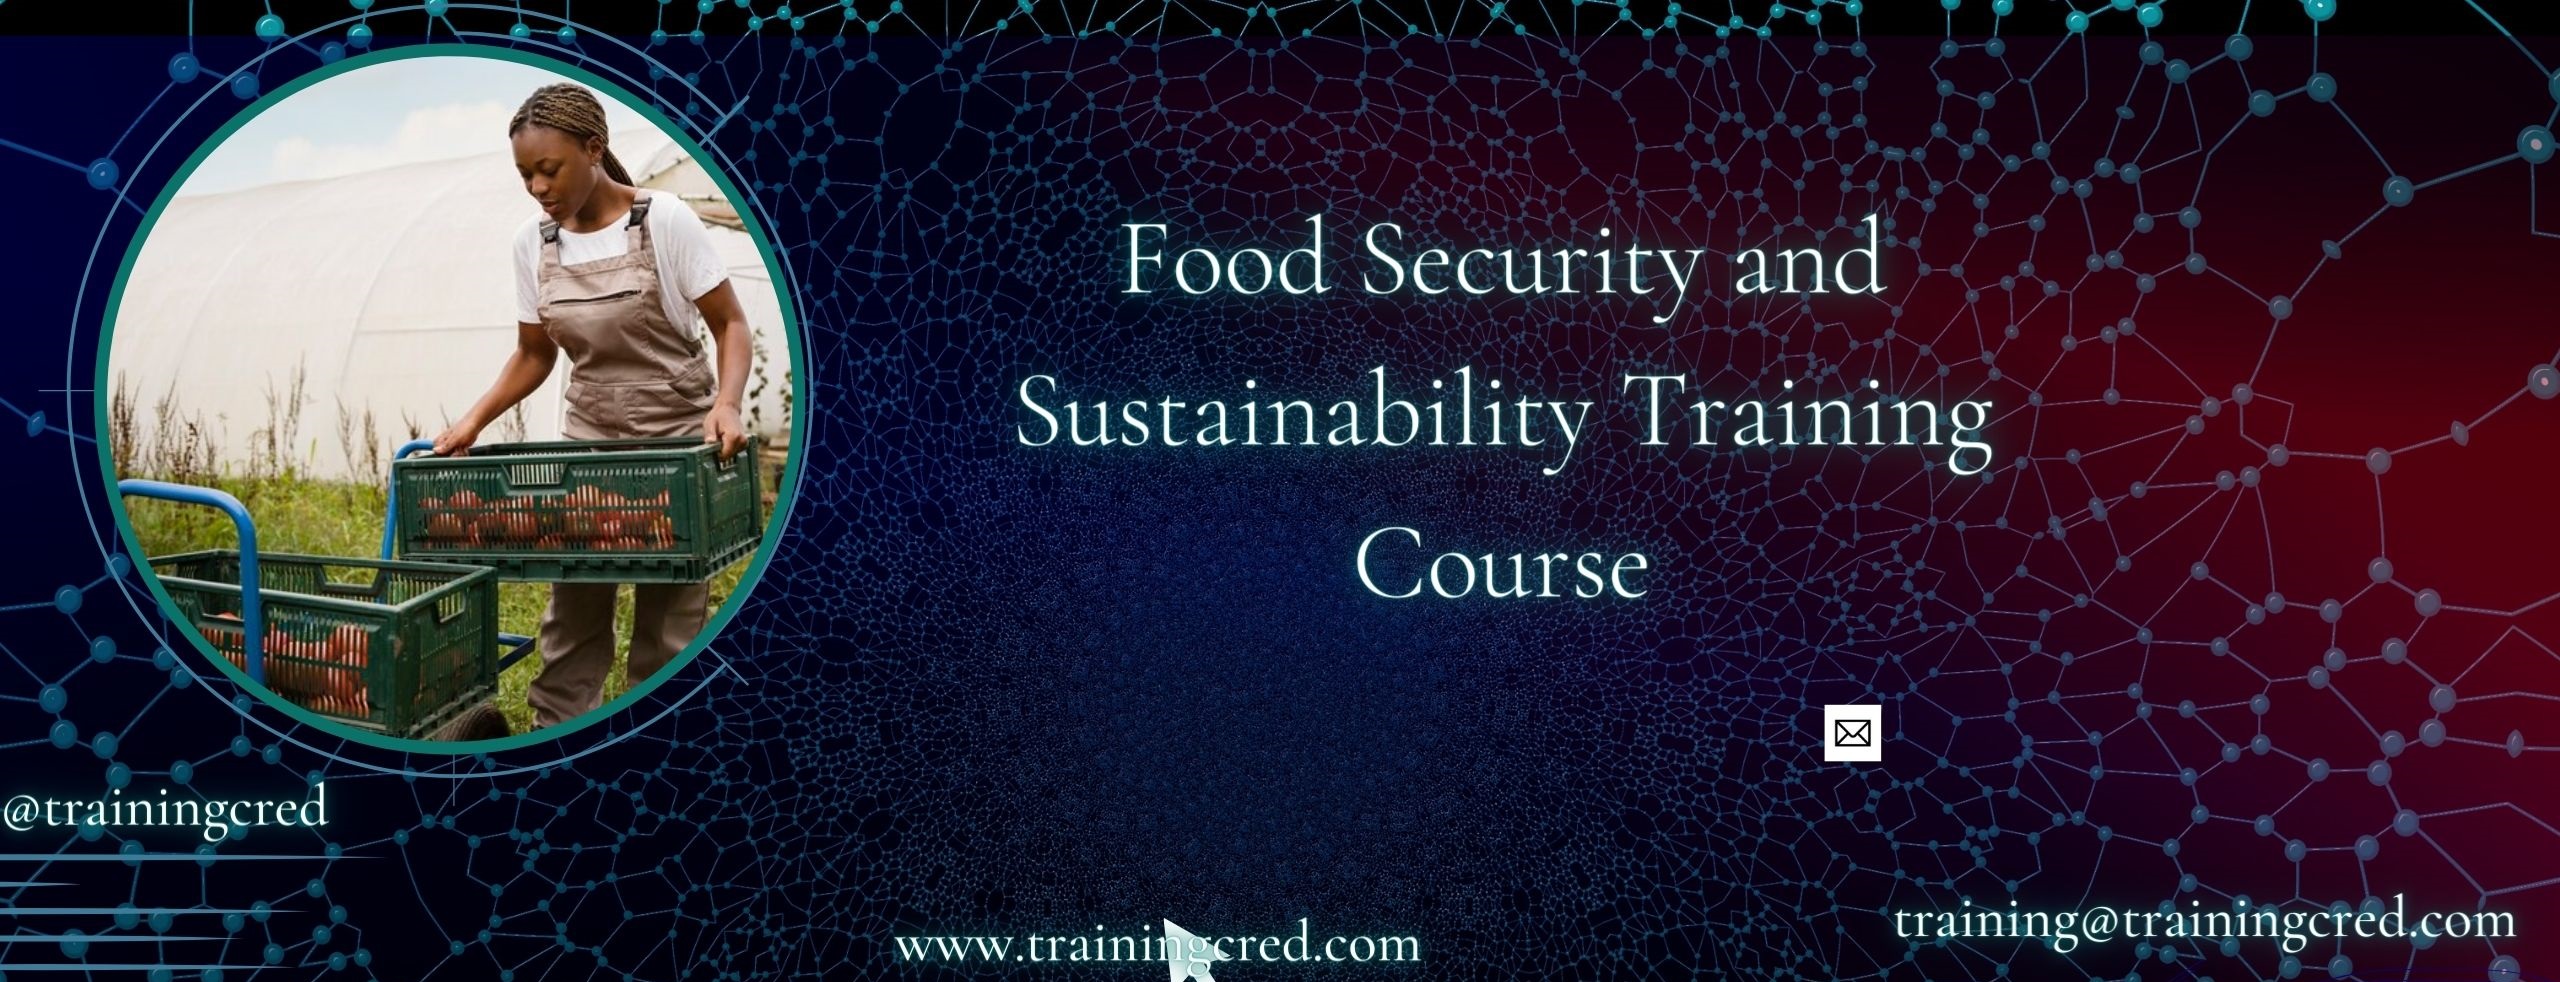 Food Security and Sustainability Training